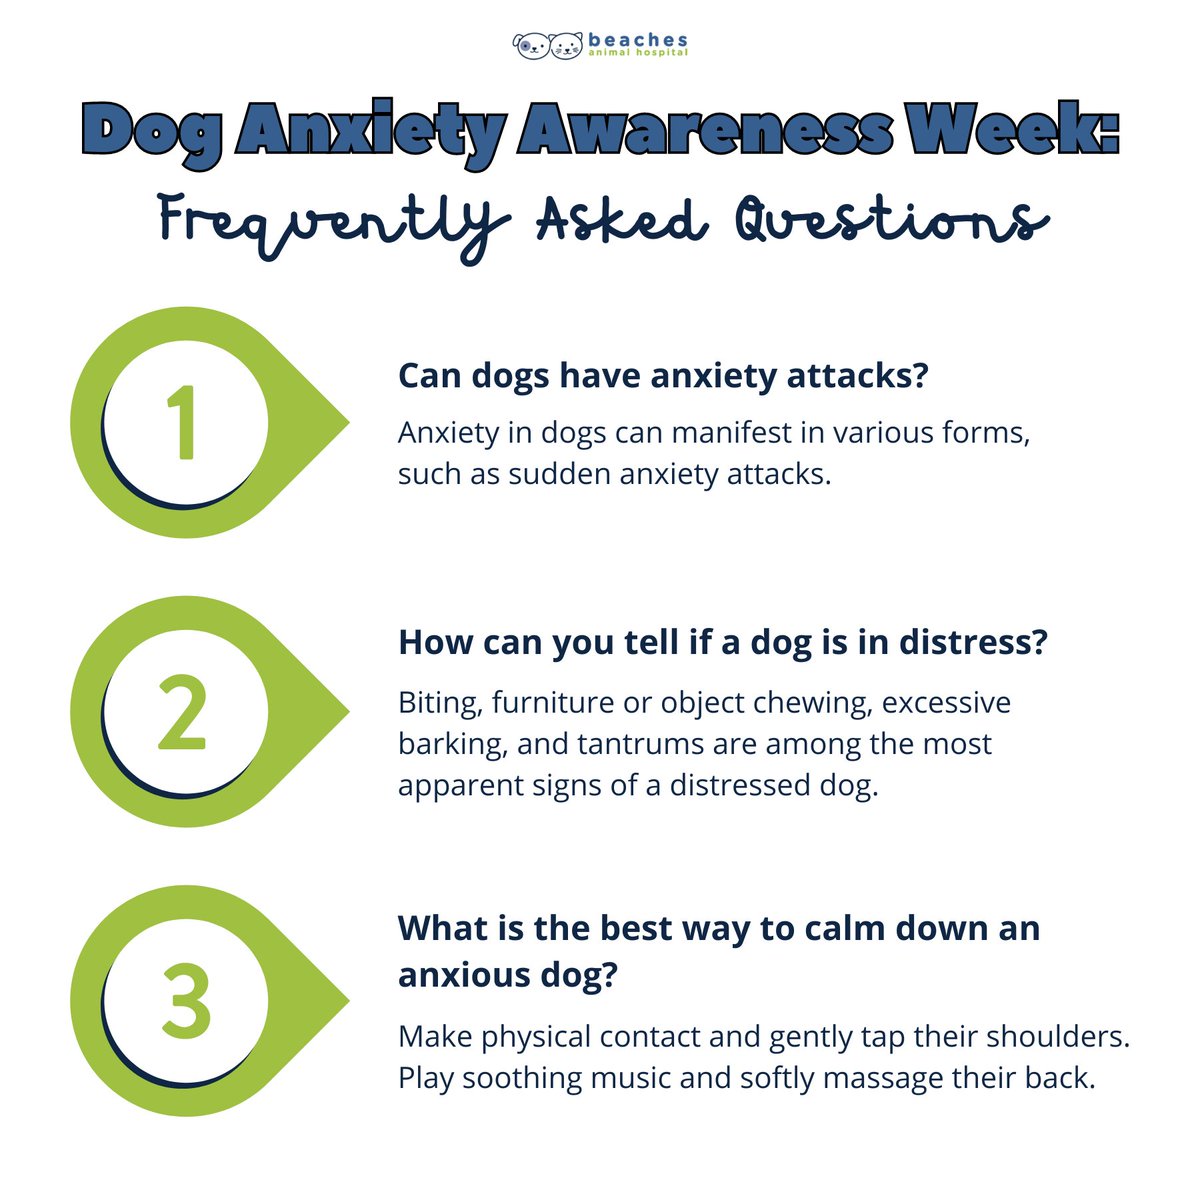 We're answering your questions about Dog Anxiety Awareness Week! The best way to support your anxious pup is by educating yourself and spreading awareness.

#love #instagood #cute #pet #petstagram #photooftheday #instamood #adorable #instapet